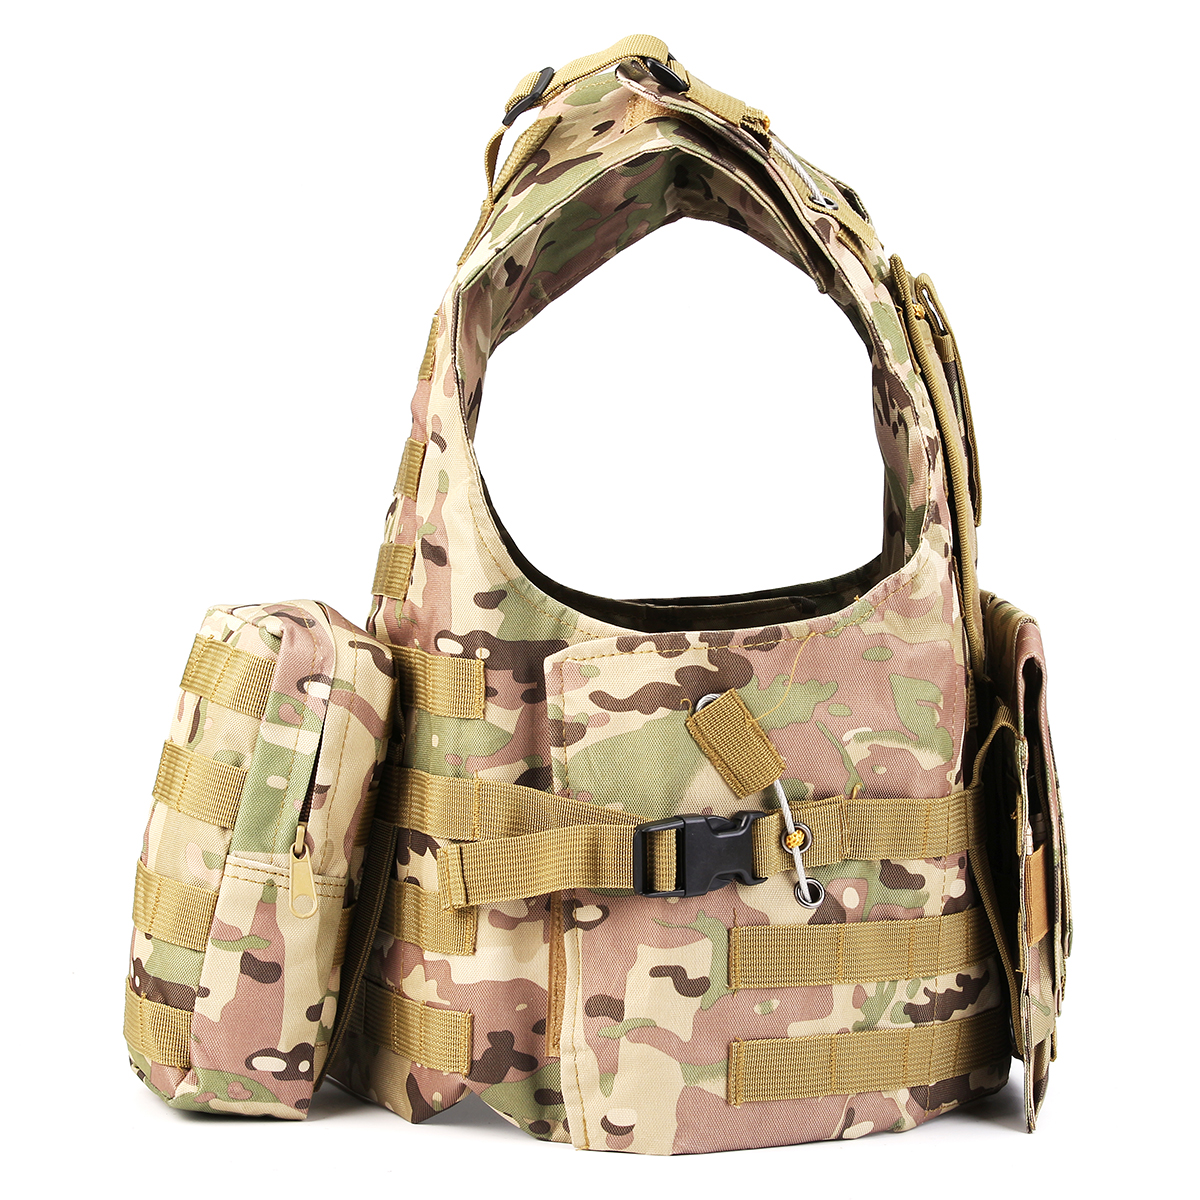 Military-Tactical-Vest-Molle-Combat-Assault-Plate-Carrier-Tactical-Vest-CS-Outdoor-Clothing-Hunting--1817235-3